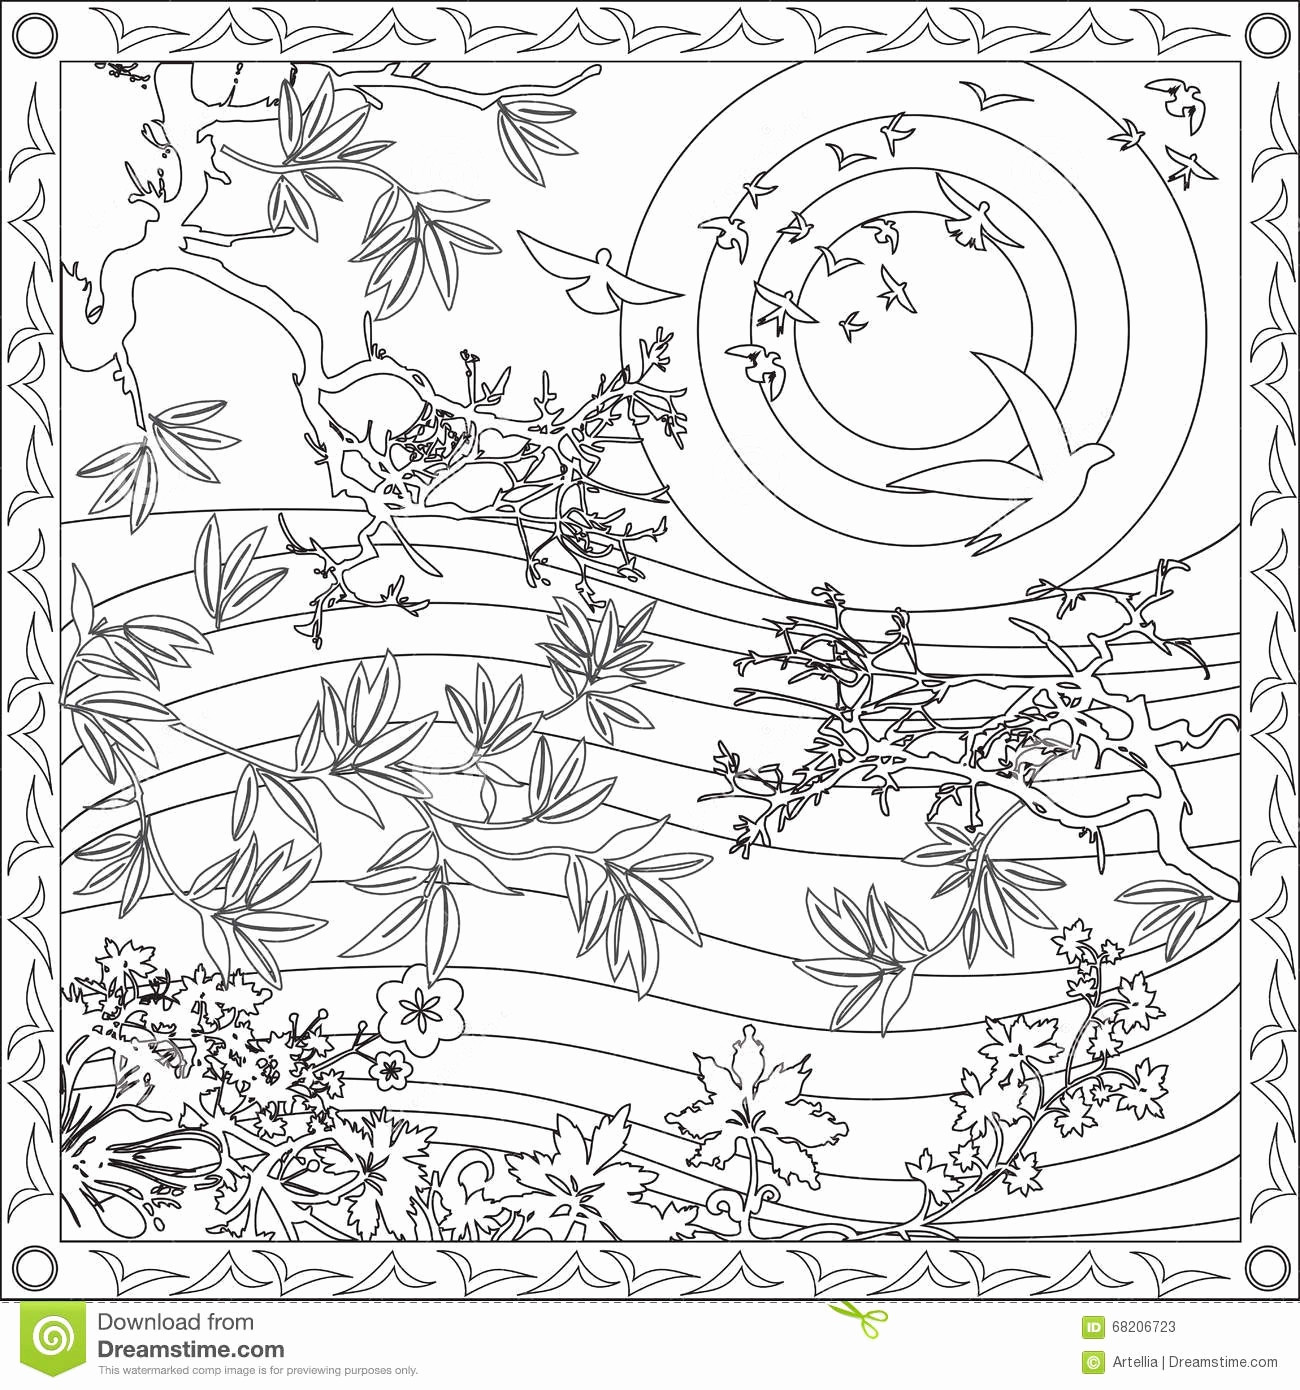 Sunset Coloring Pages For Adults
 Sunset Coloring Pages For Adults thekindproject